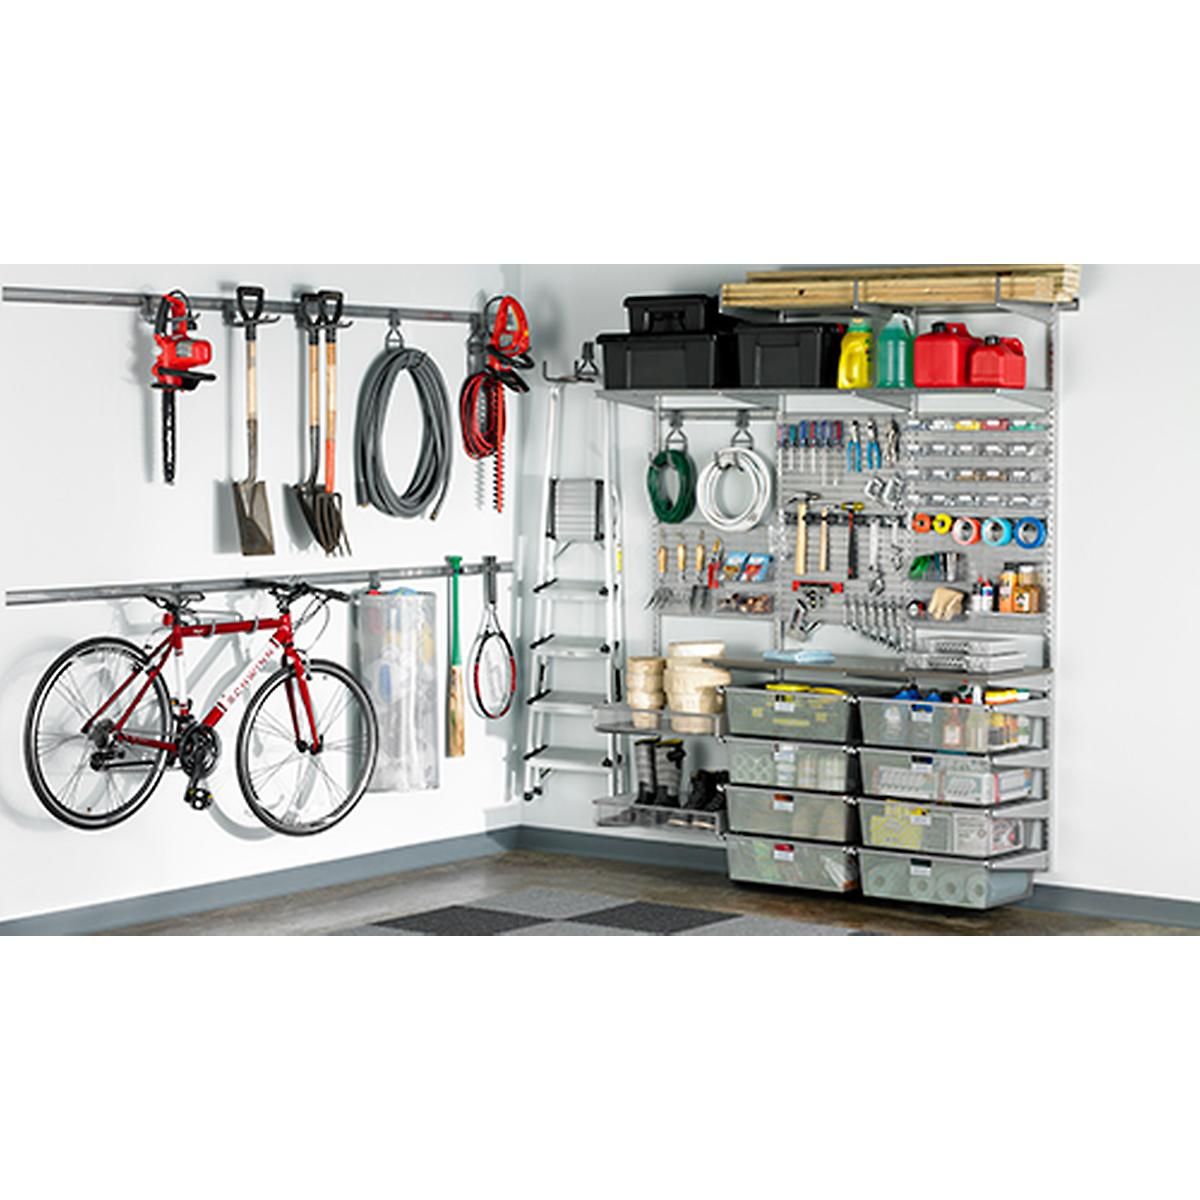 Elfa Utility Round Cord Hook | The Container Store